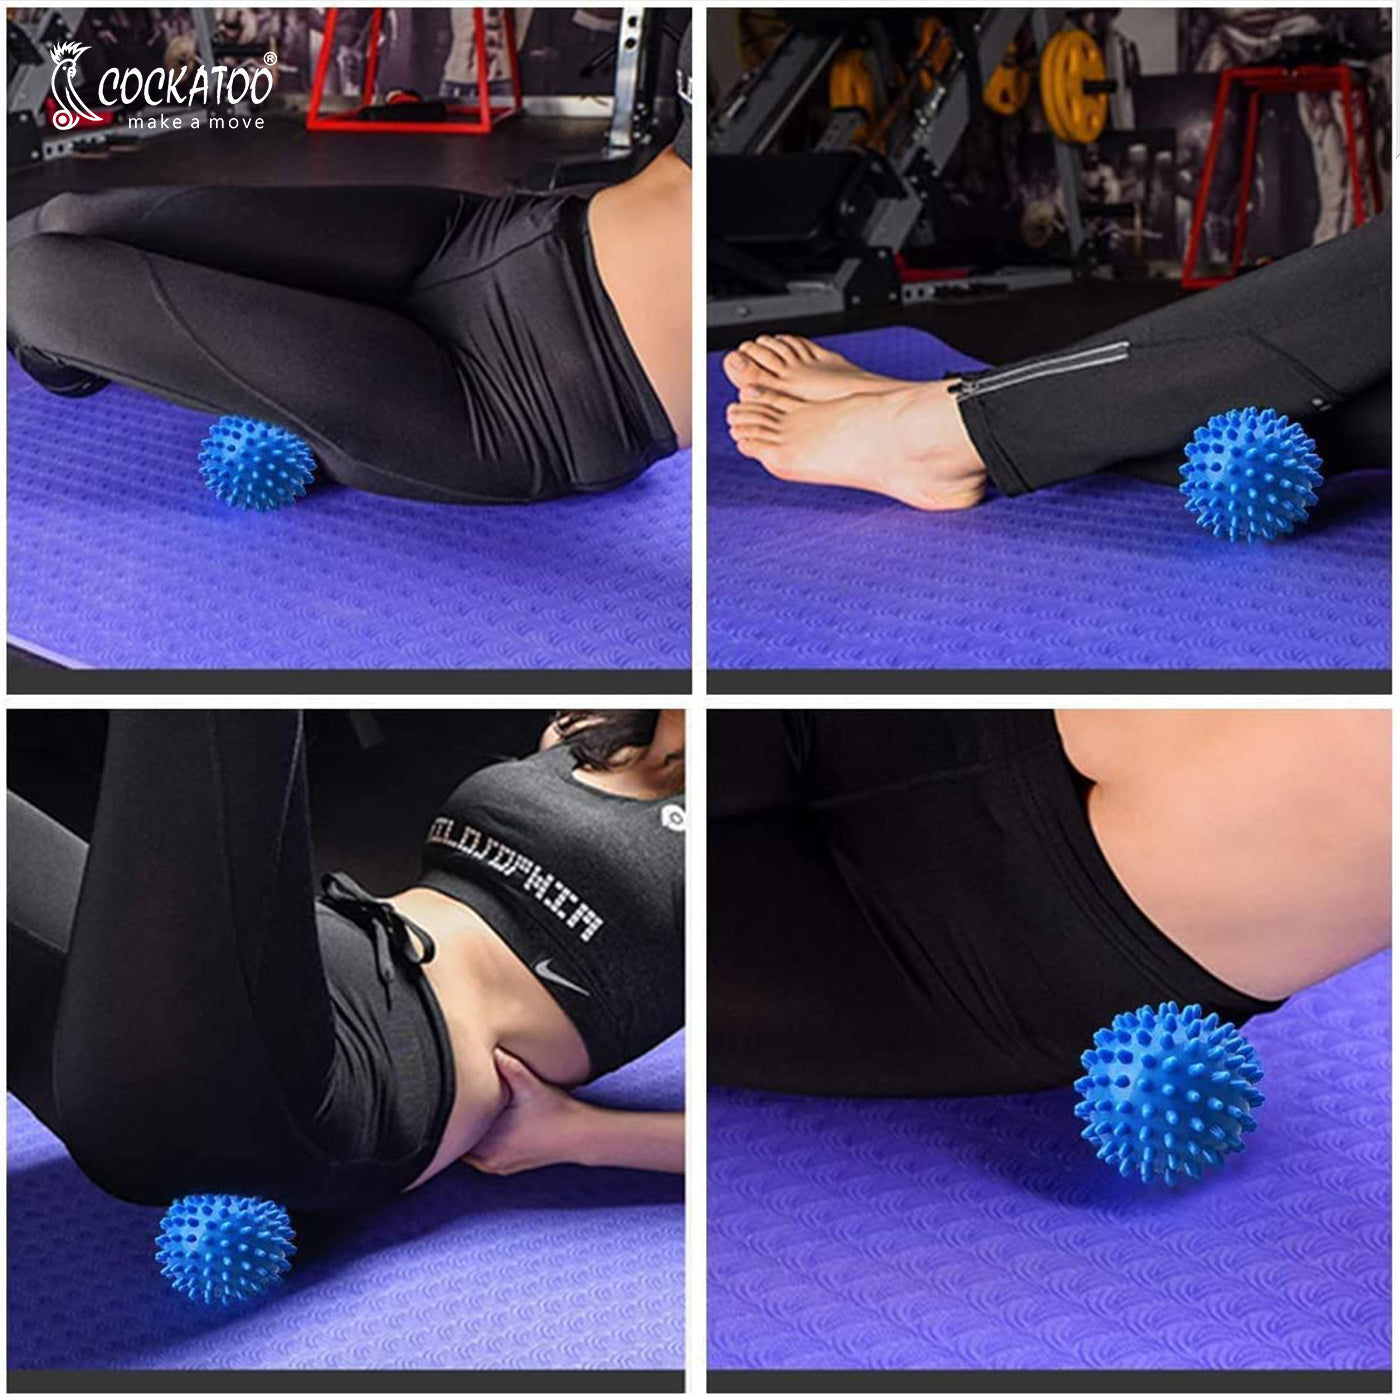 Cockatoo Massage Ball Set of 2 Balls, Soft Spike, Hard Spike for Self Release Deep Tissue Manual Massager, Muscle Mobility, Post Workout Recovery, Multicolor